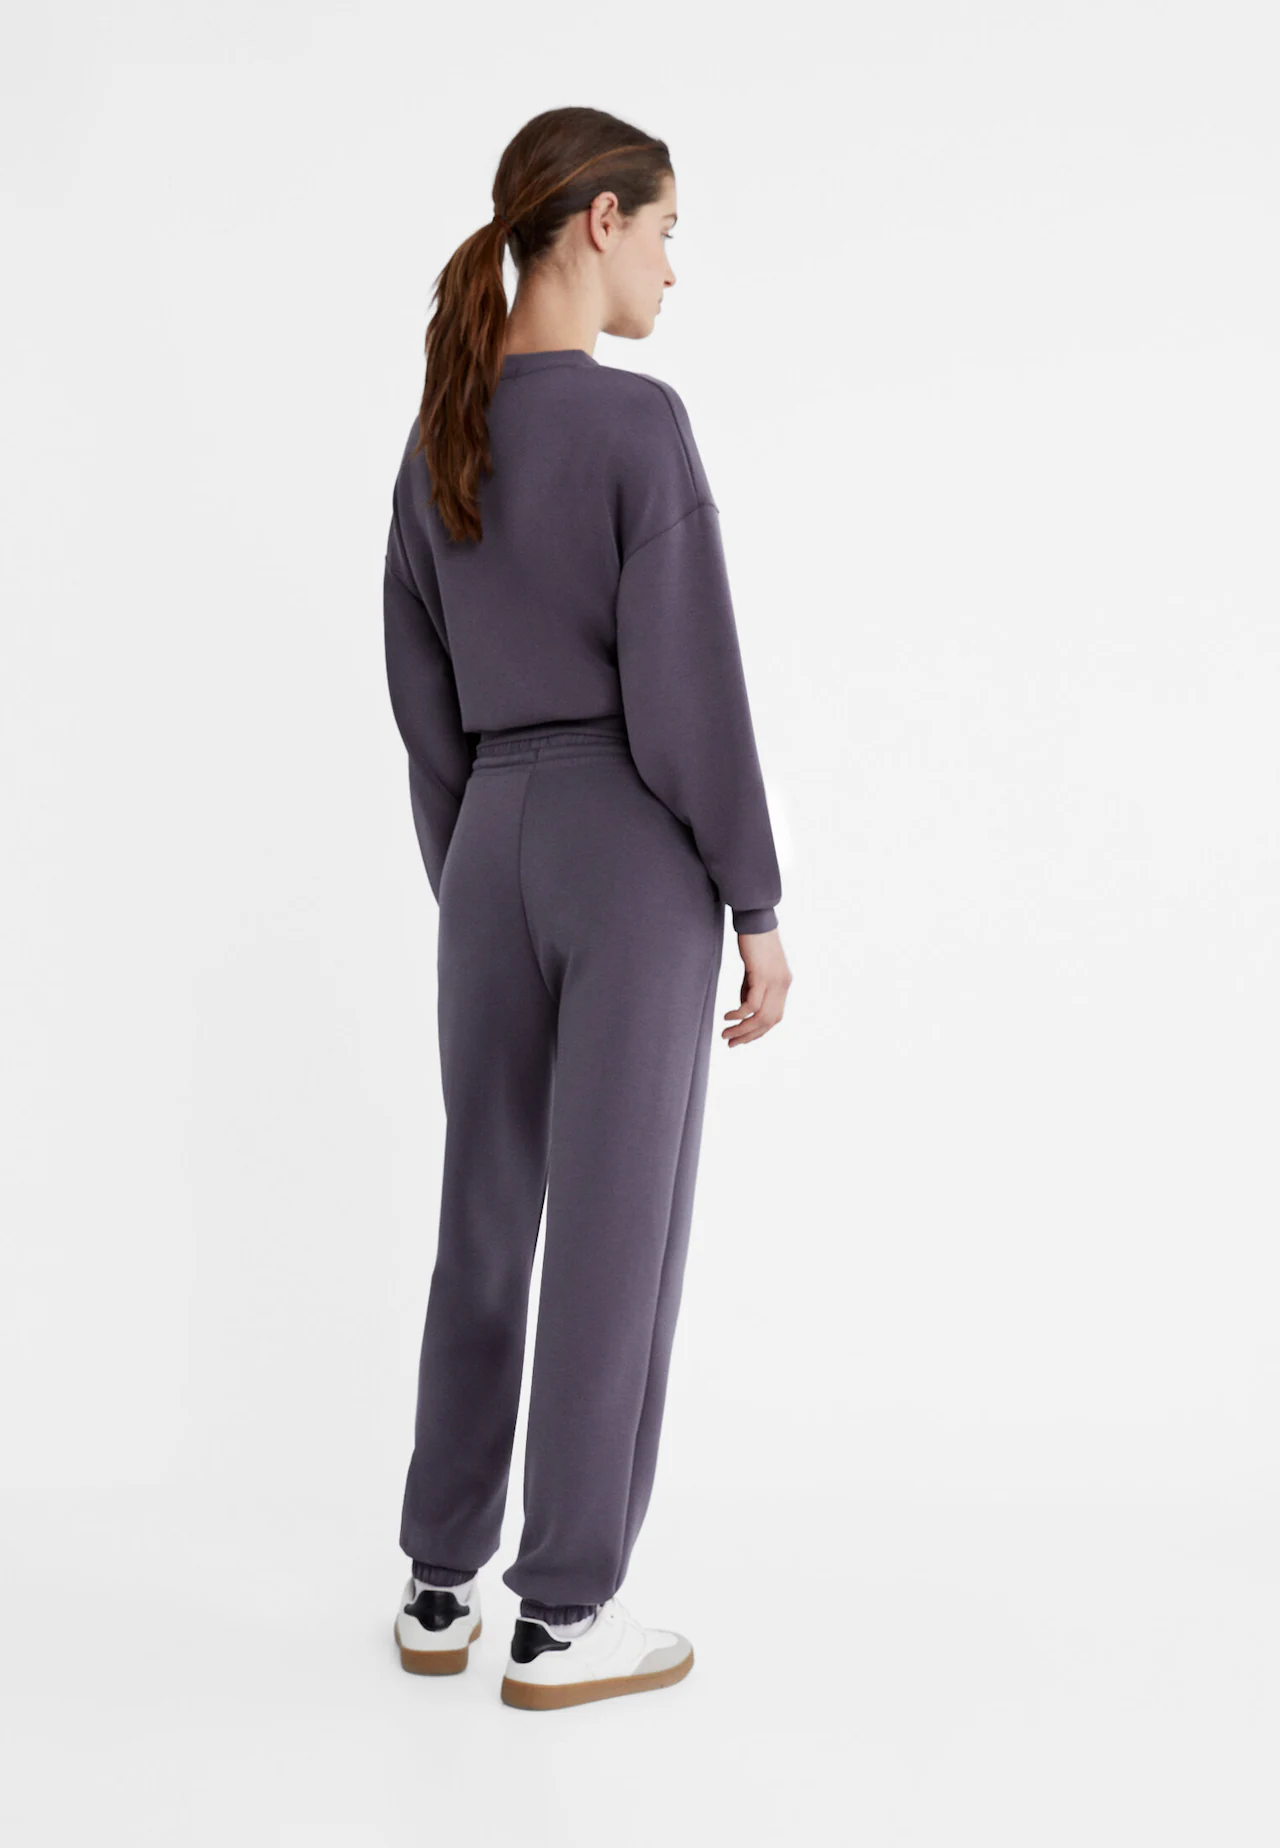 Stradivarius seamless ribbed top and legging co-ord in lilac, ASOS